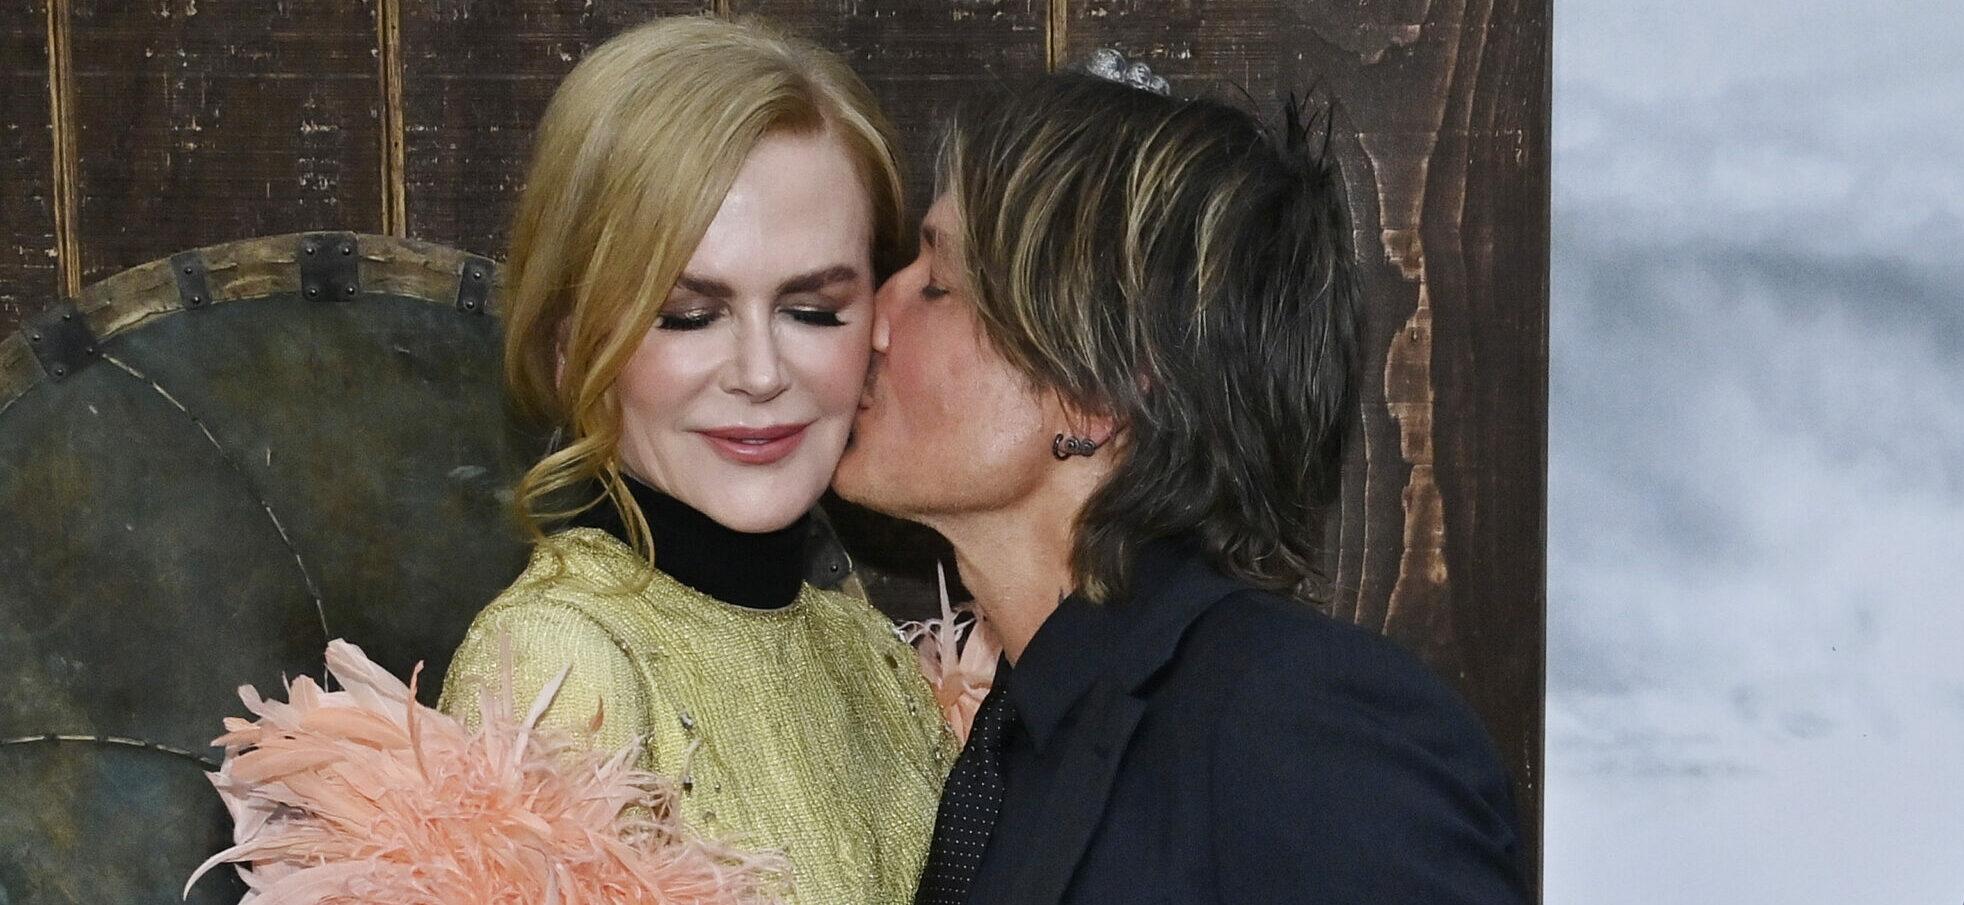 Nicole Kidman and her husband, musician Keith Urban attend the premiere of the action-filled motion picture epic "The Northman" at the TCL Chinese Theatre in the Hollywood section of Los Angeles on Monday.